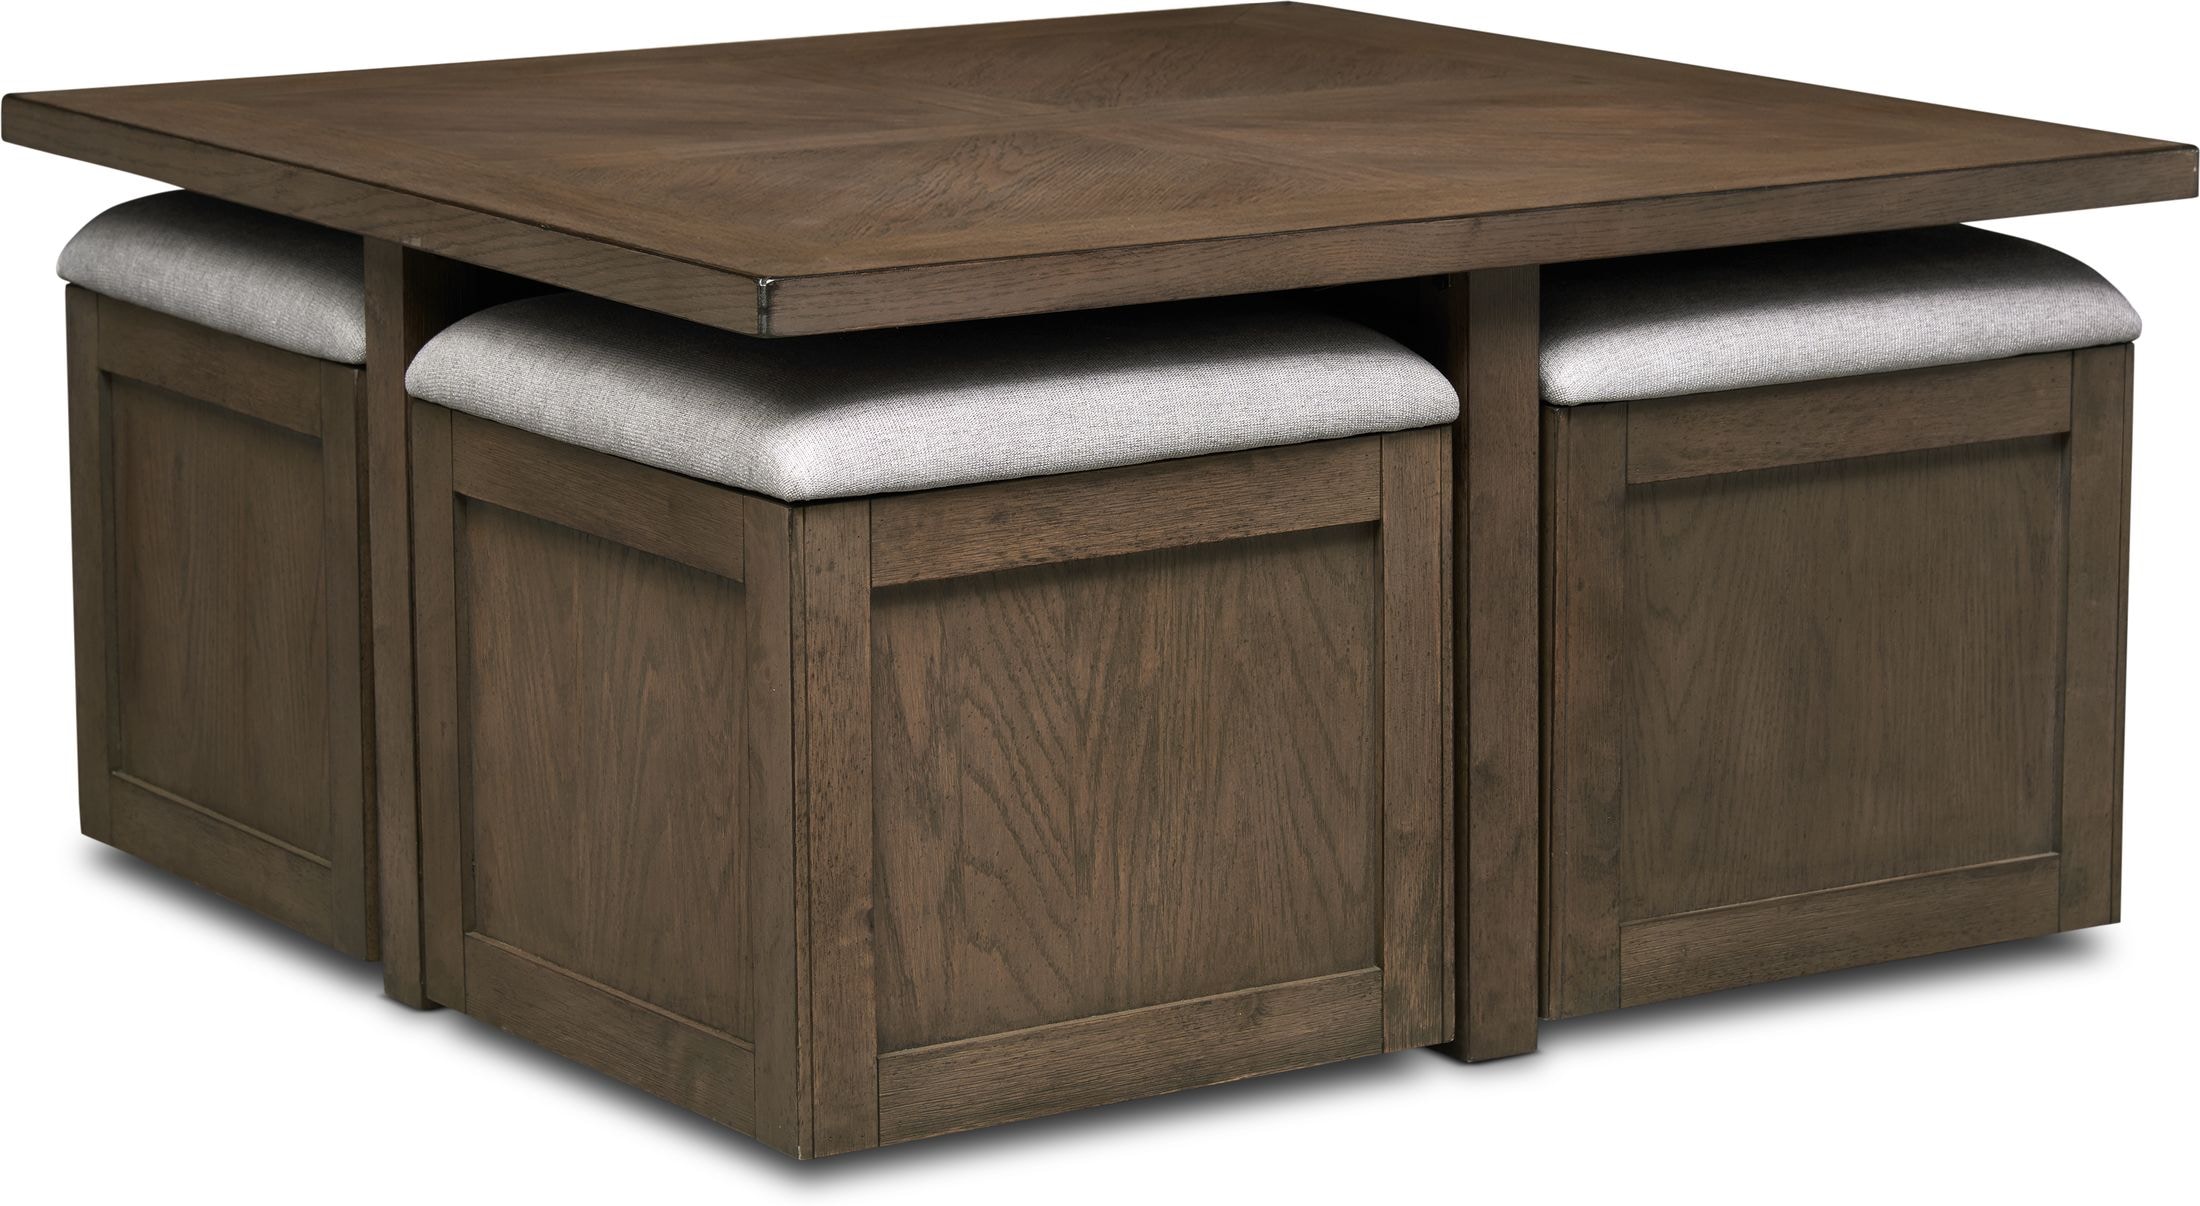 Grange Jacob Coffee Table - Brittfurn Png Images Pngwing : La grange interiors sells furniture and accessories to decorators and the public alike.